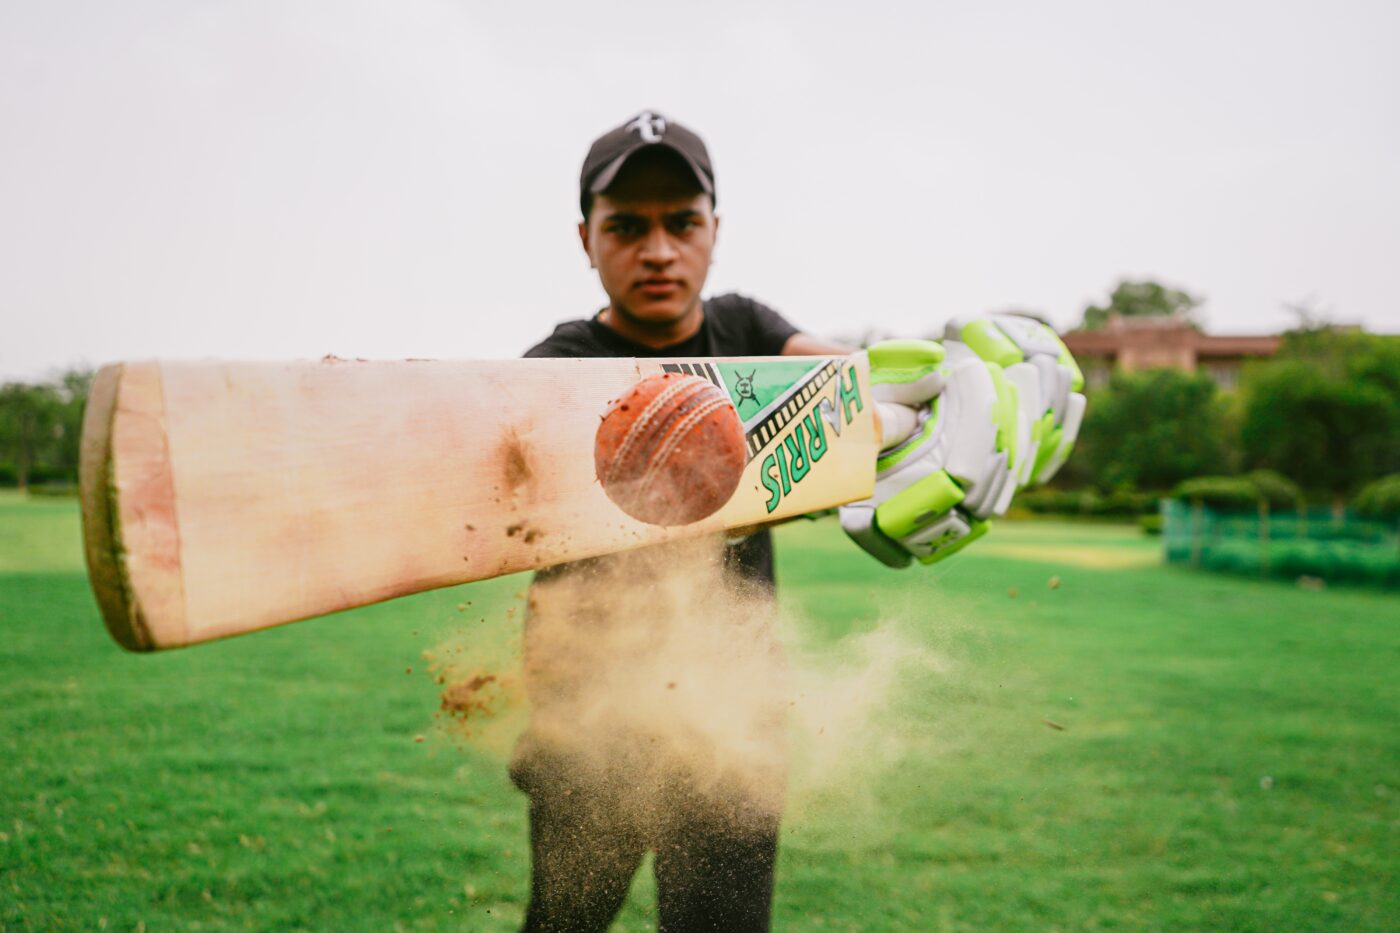 Cleaning Your Cricket Equipment